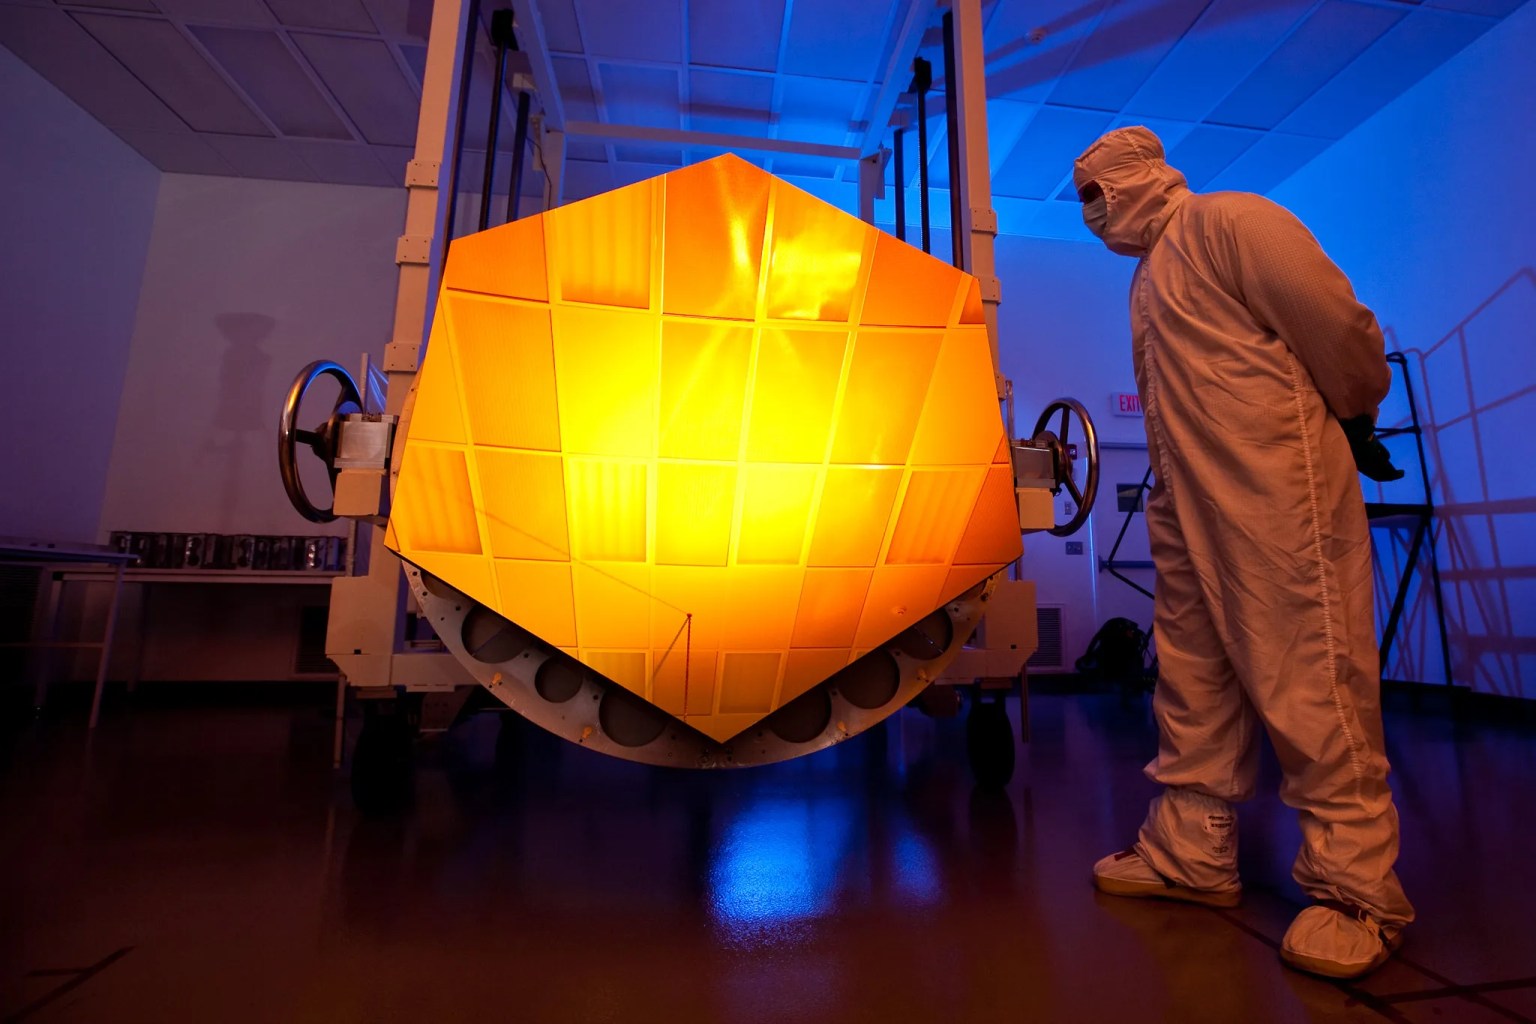 The James Webb Space Telescope's Engineering Design Unit (EDU) primary mirror segment, coated with gold.